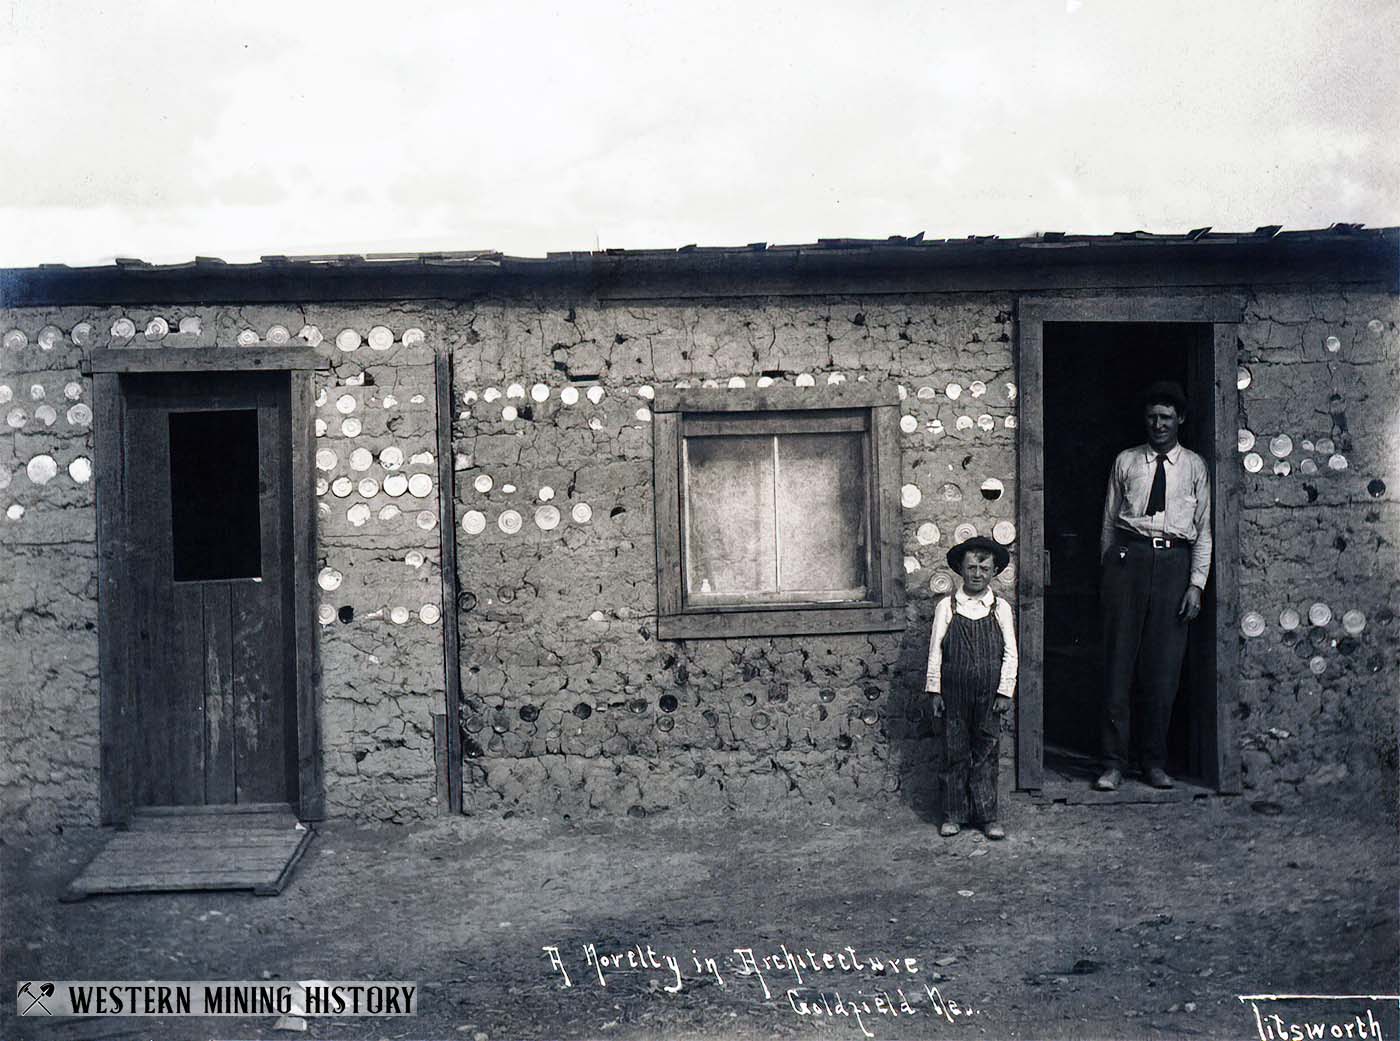 Bottle House at Goldfield, Nevada ca. 1905